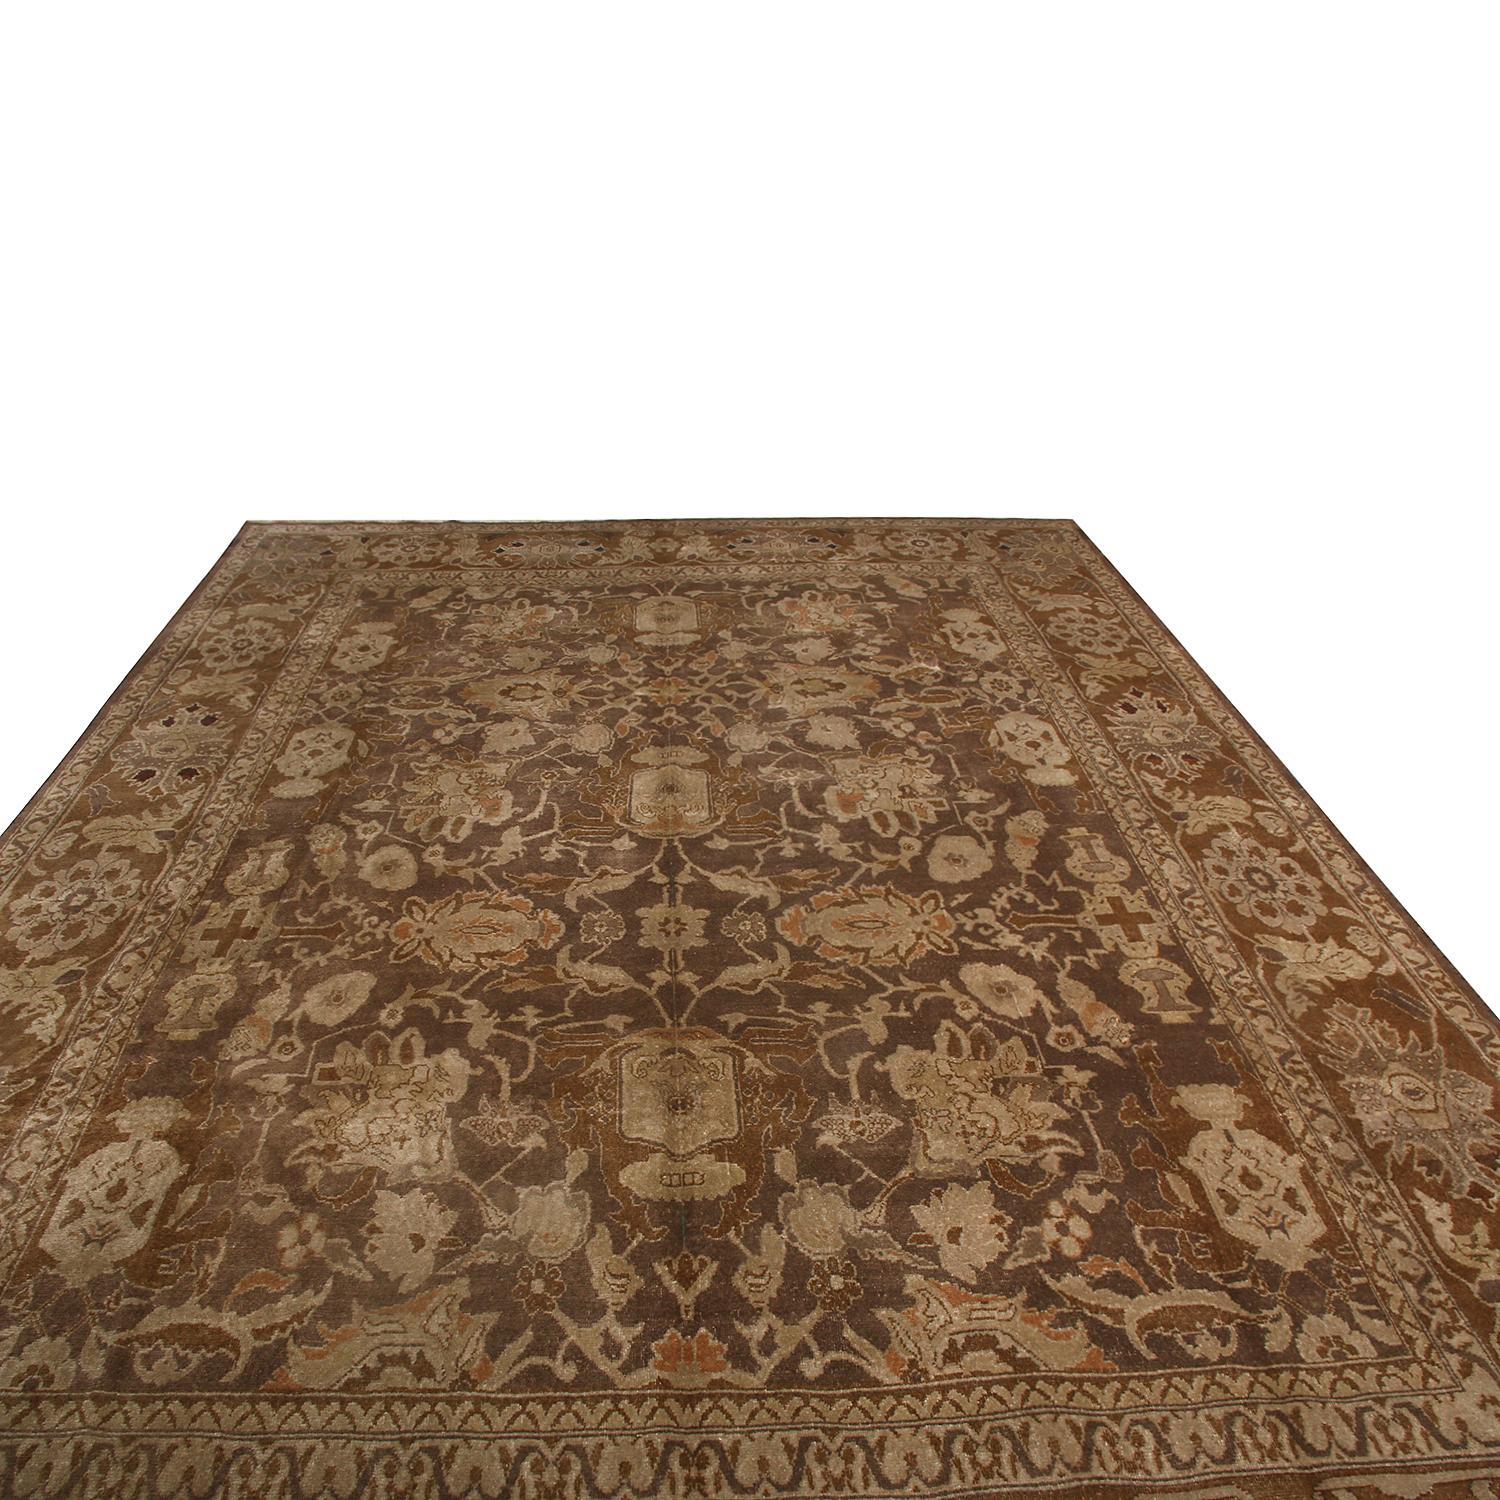 Hand knotted in Persia originating between 1950-1960, this vintage Sultanabad wool rug enjoys pristine condition with a Classic pallet of rich and warm beige-brown colorways, complementing the muted, elegant all-over floral pattern while accented